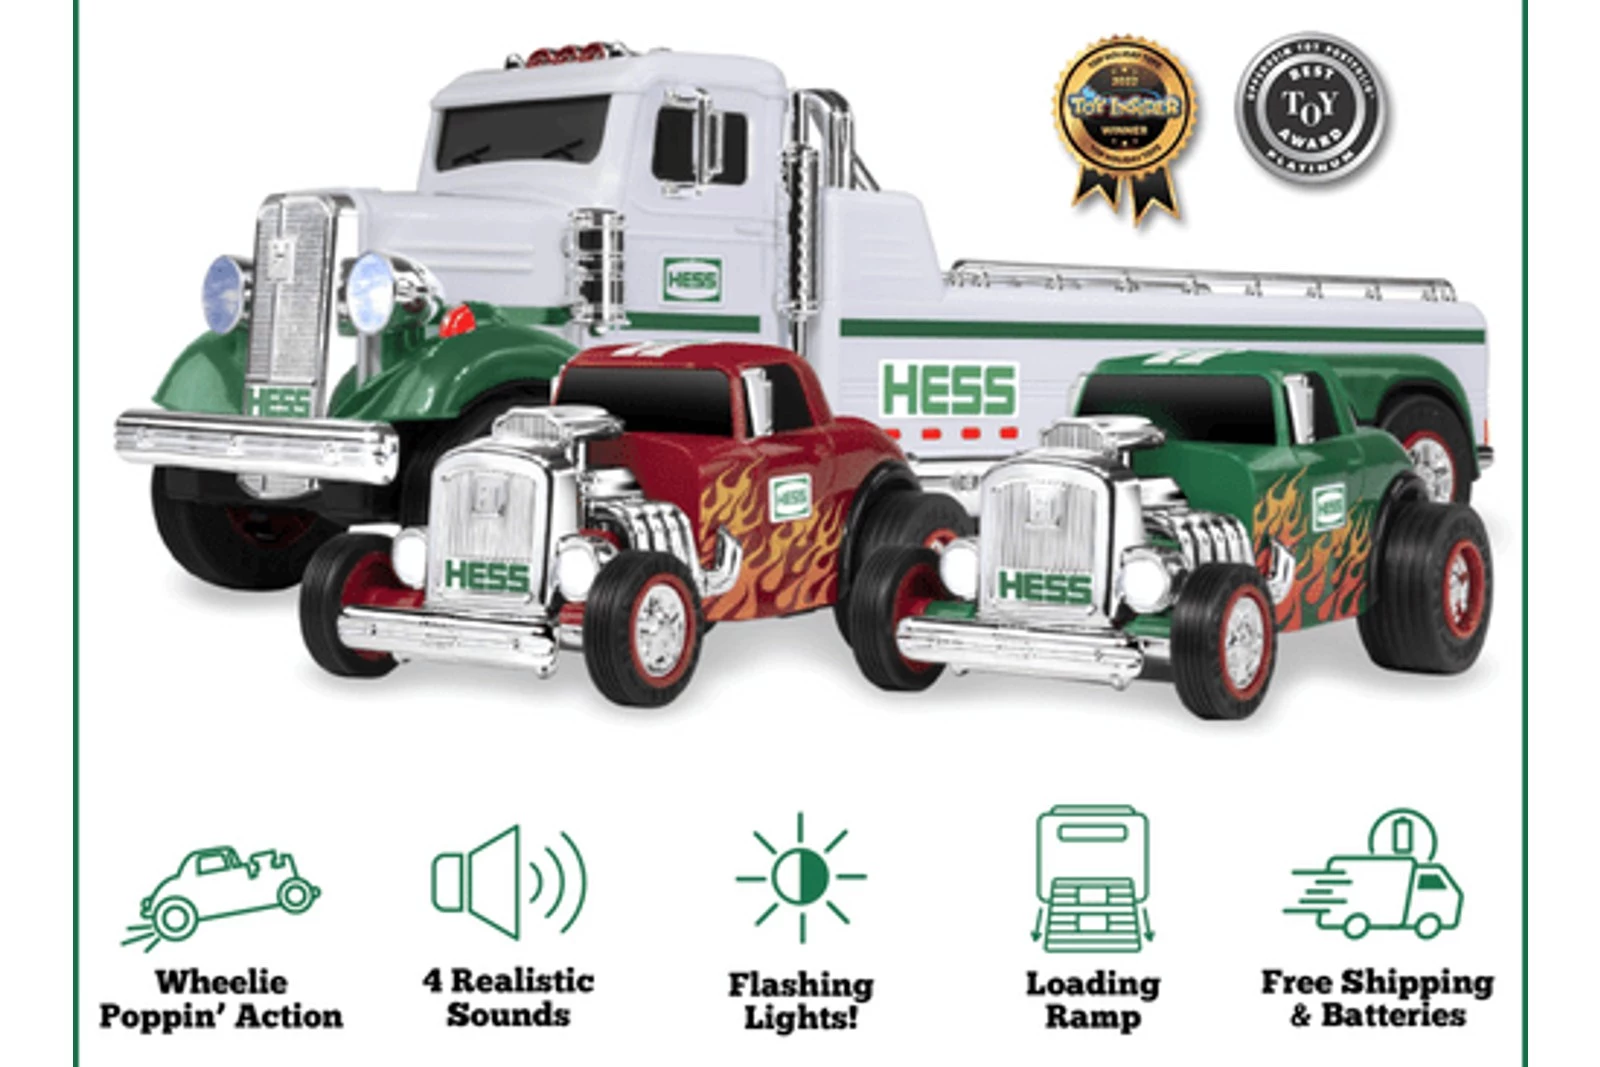 The 2022 Hess Toy Trucks are here